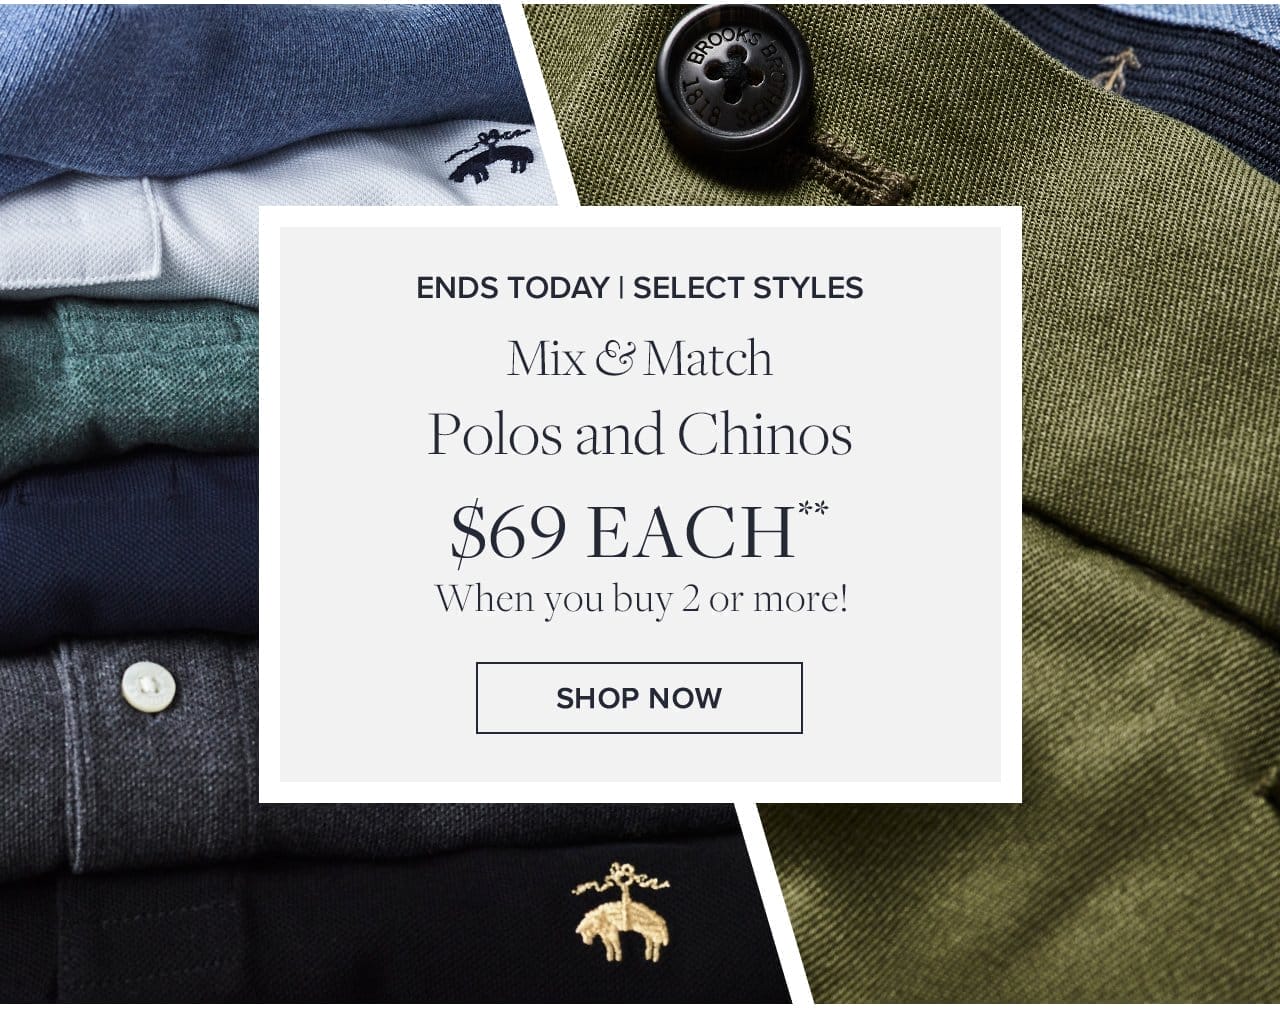 Ends Today | Select Styles Mix and Match Polos and Chinos \\$69 Each When you buy 2 or more! Shop Now